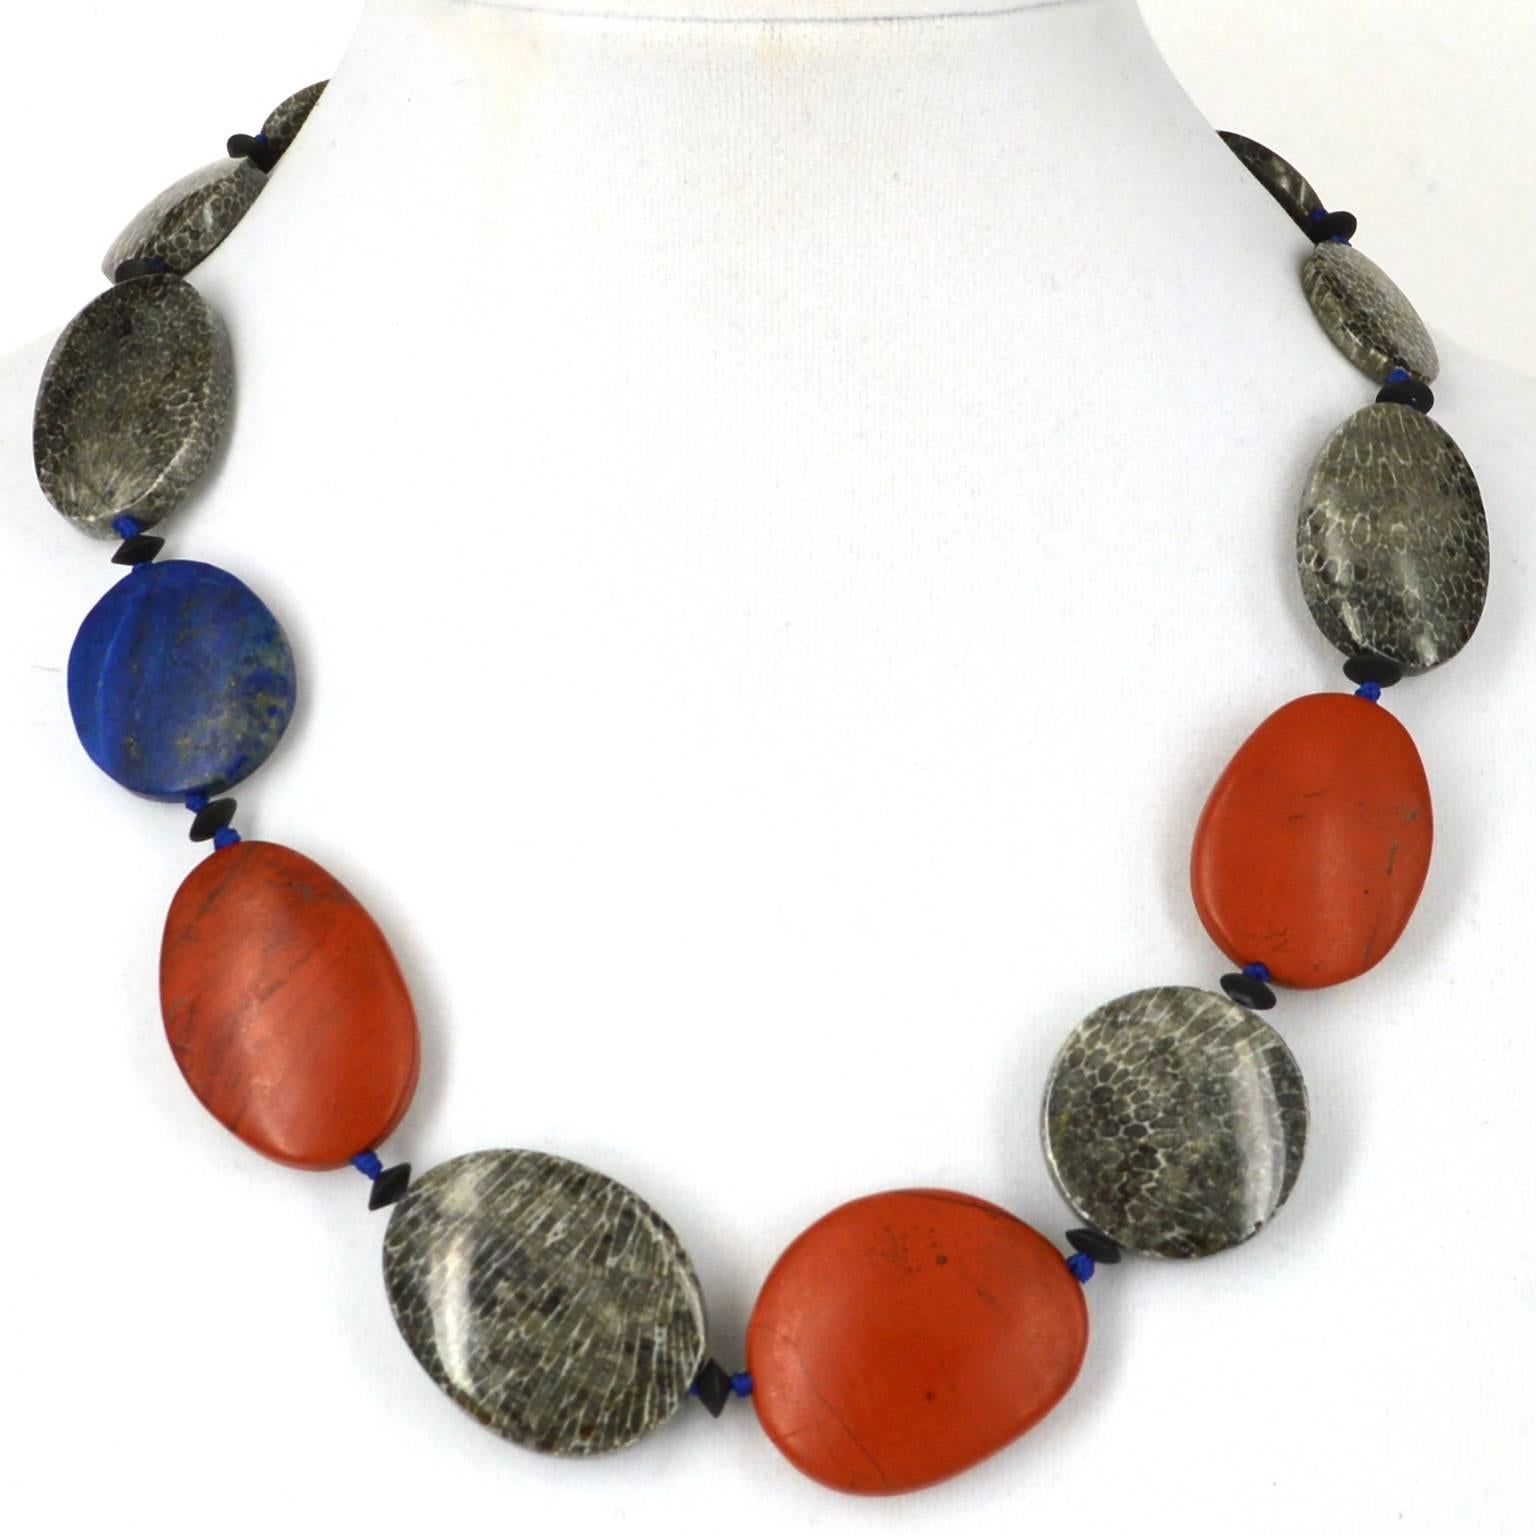 Bryozoan fossil Coral flat oval beads ranging from 18.3x15mm up to 34x28.3mm 
with 3 flat oval matt Red Jasper beads measuring 31.6x34mm, 34.1x29mm and 35.3x24.4mm. The matt Lapis Lazuli bead is 26.2x23.7mm. Necklace is spaced with 6x3mm matt Onyx